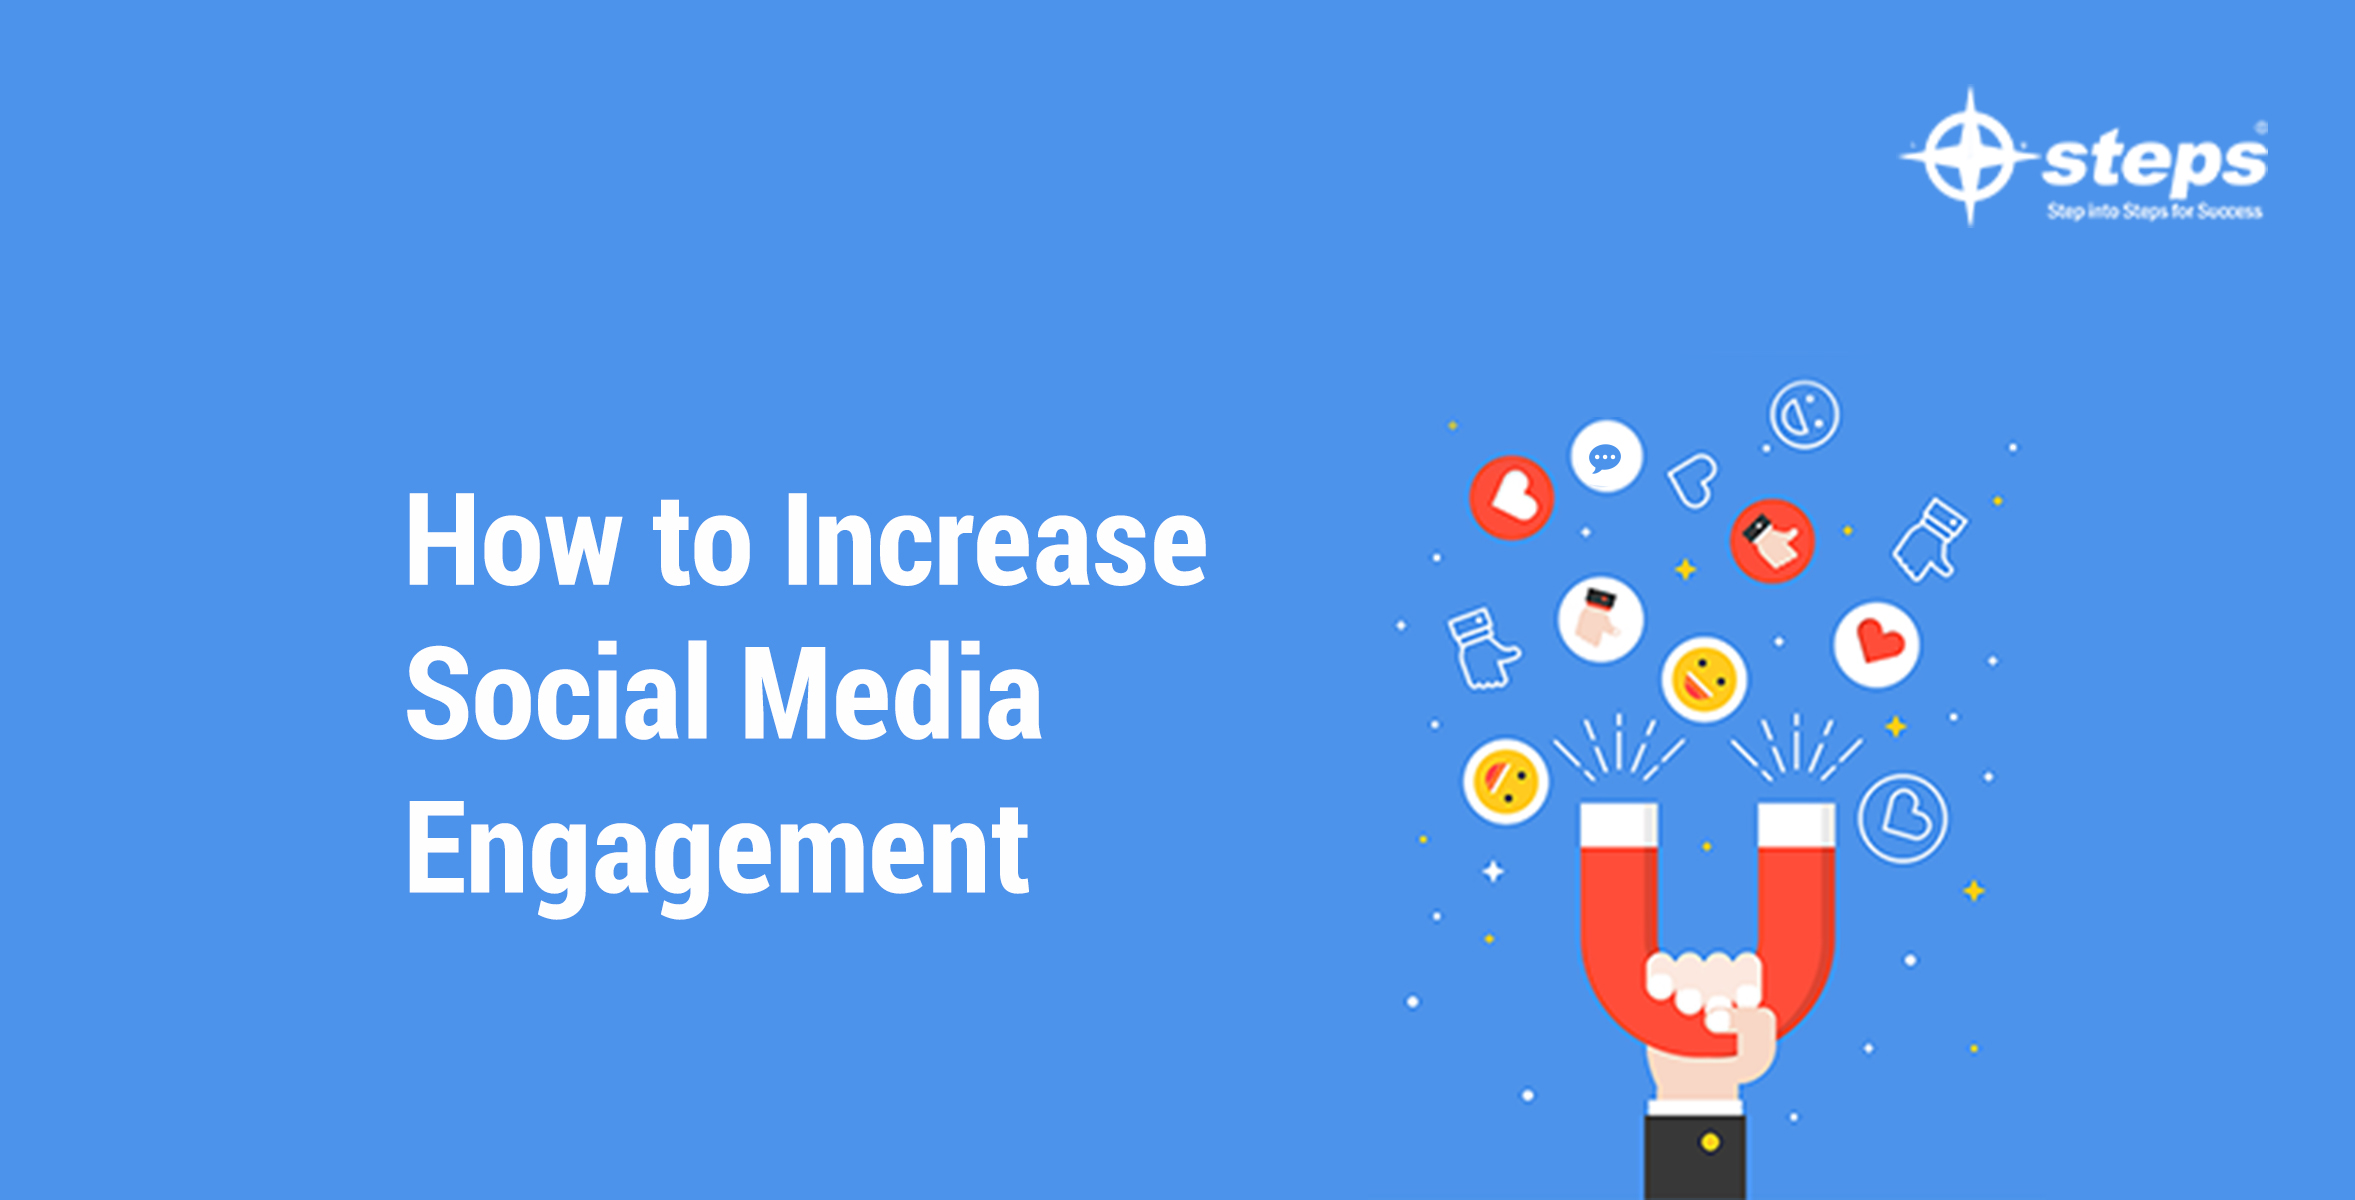 How to Increase Social Media Engagement?